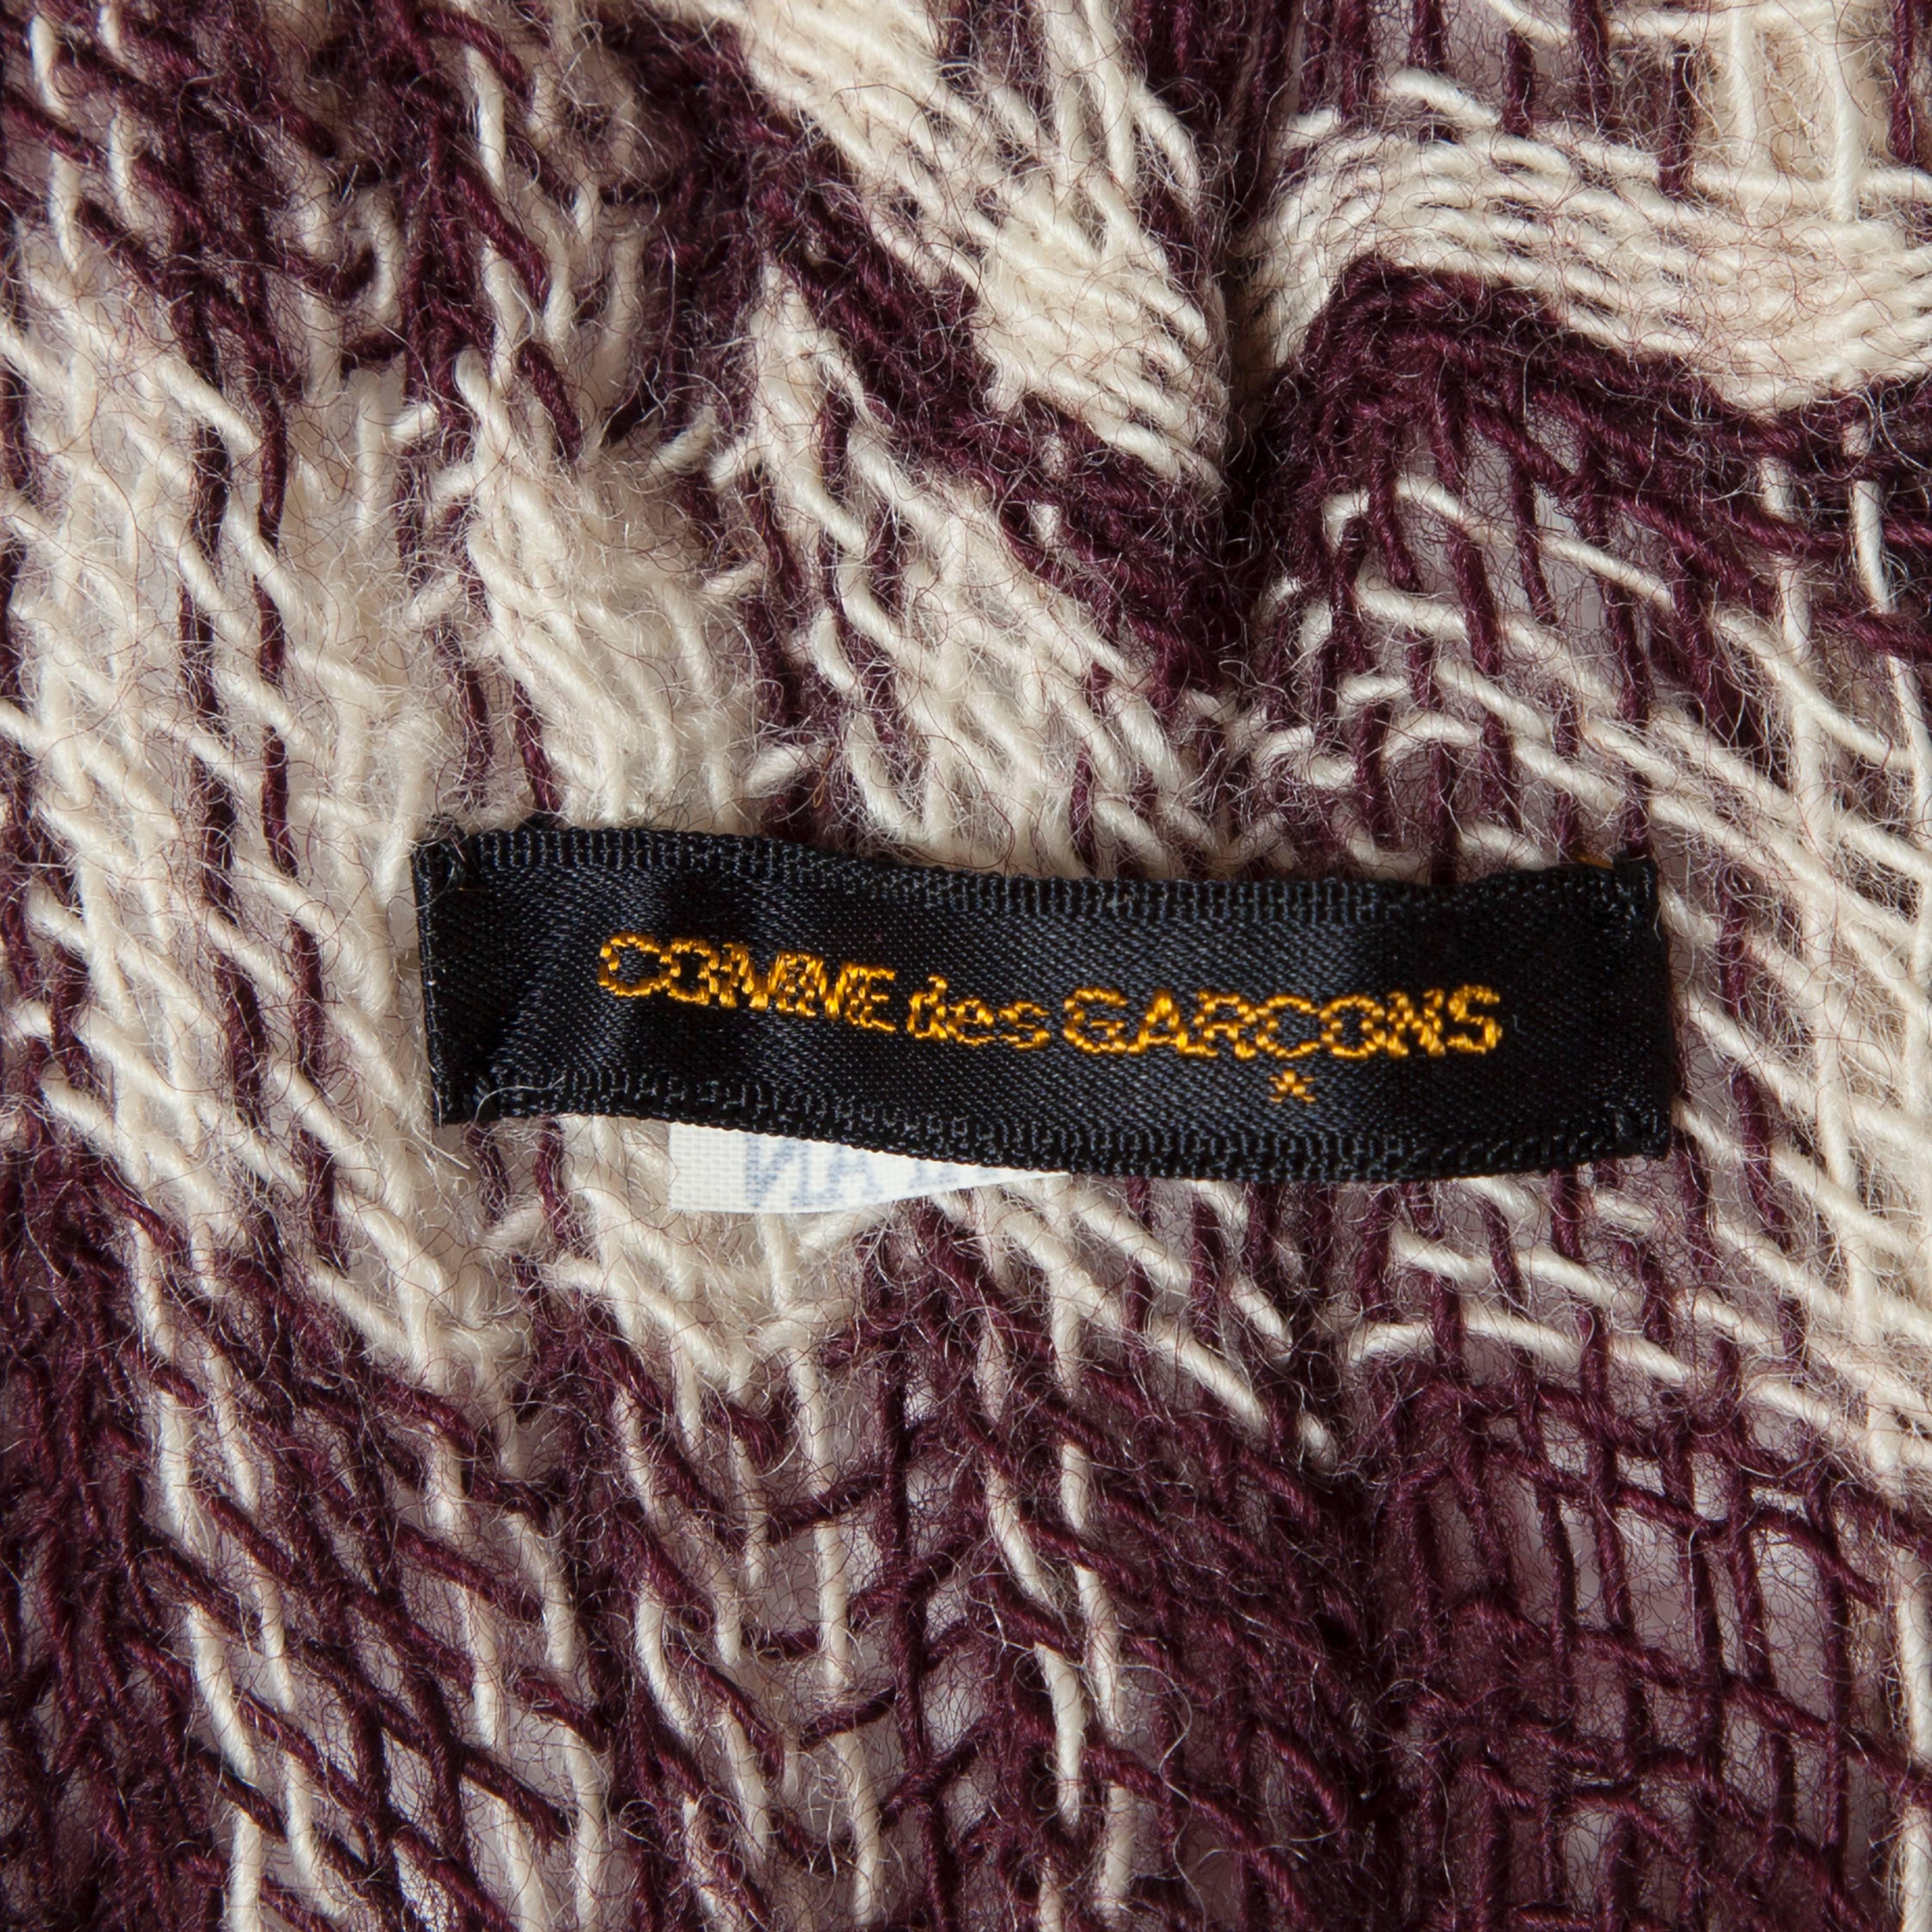 Comme des Garcons knit woven over sized scarf from 1983.
Plaid like pattern with bordeaux and cream white wool yarn carefully woven material with such calculated detail. Great archive piece.
The same scarf was used in book 